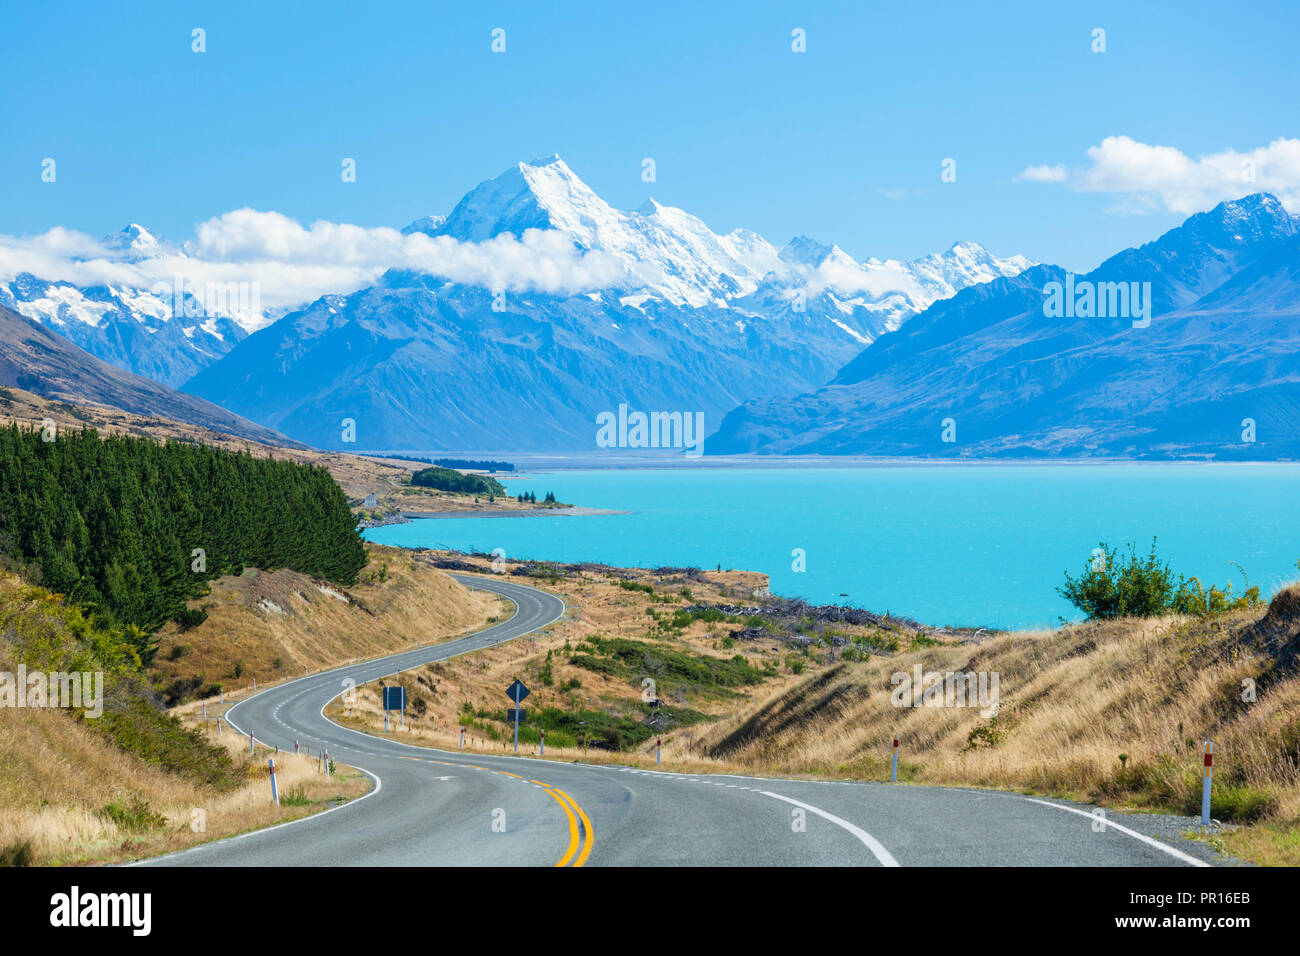 Mount Cook, Highway 80 S curve road and Lake Pukaki, Mount Cook National Park, UNESCO World Heritage Site, South Island, New Zealand, Pacific Stock Photo